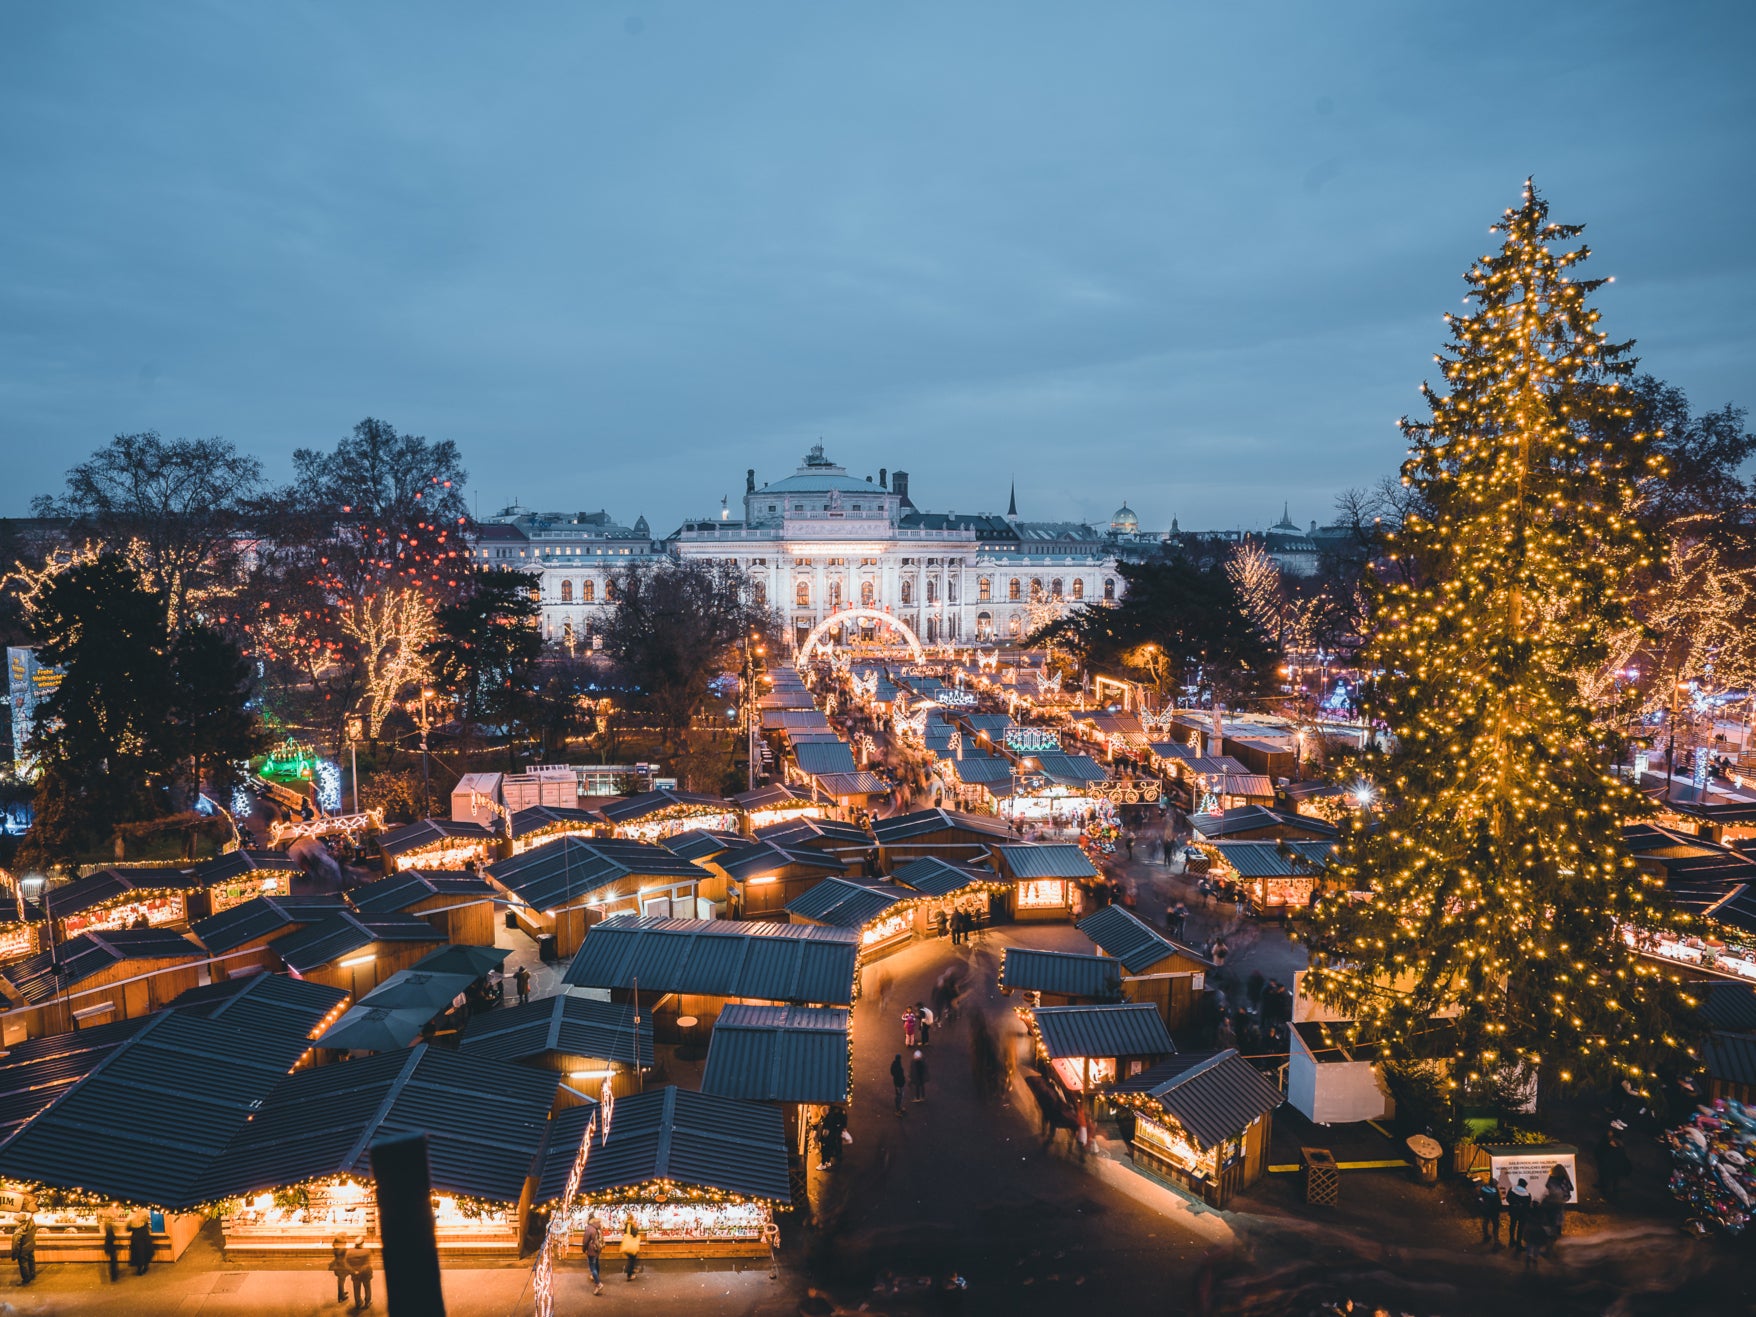 How to find the perfect balance of cool and kitsch on a Vienna city break this Christmas | The Independent